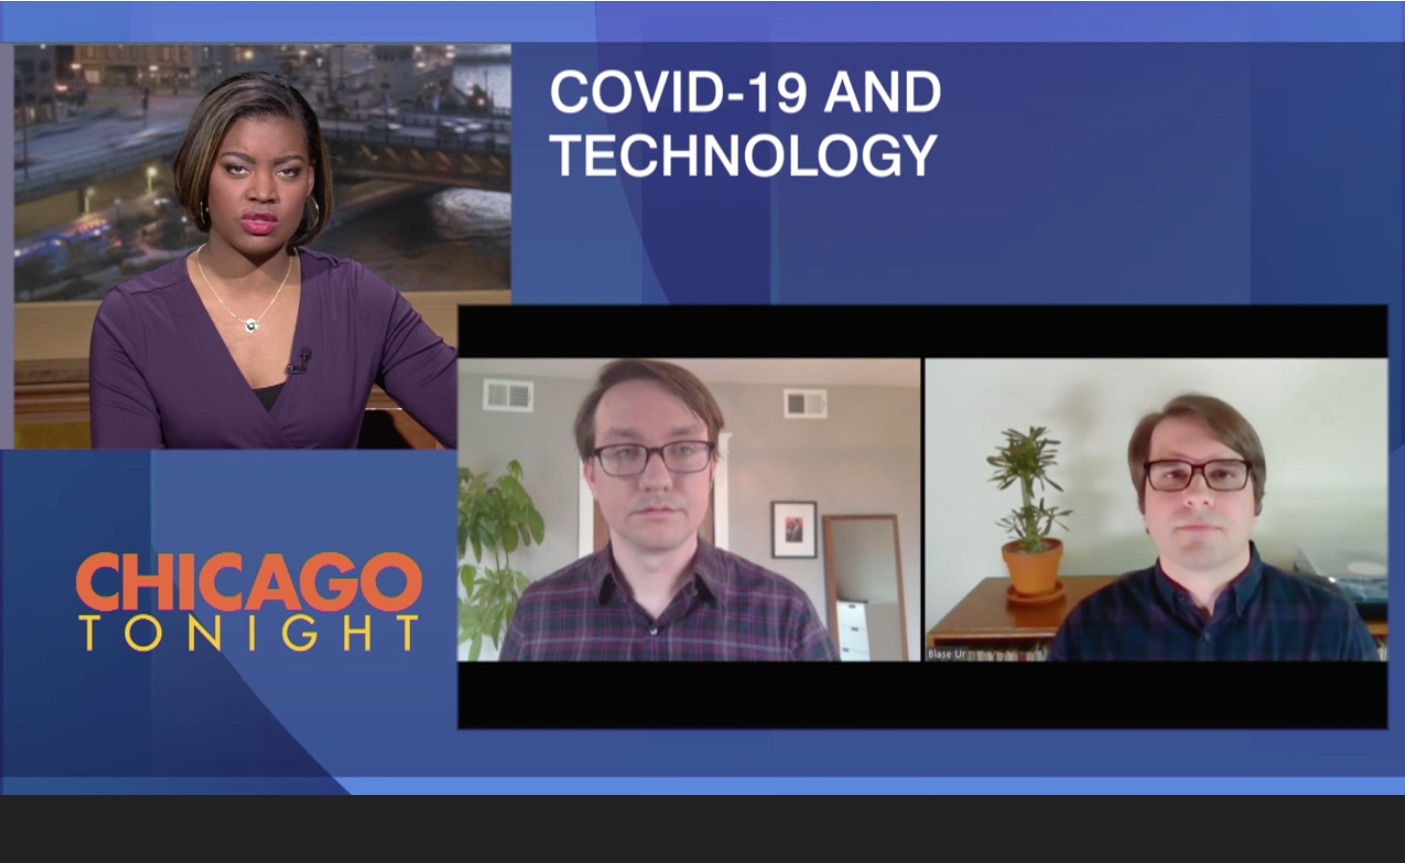 Tech Giants’ Plan to Track COVID-19 Raises Privacy Concerns